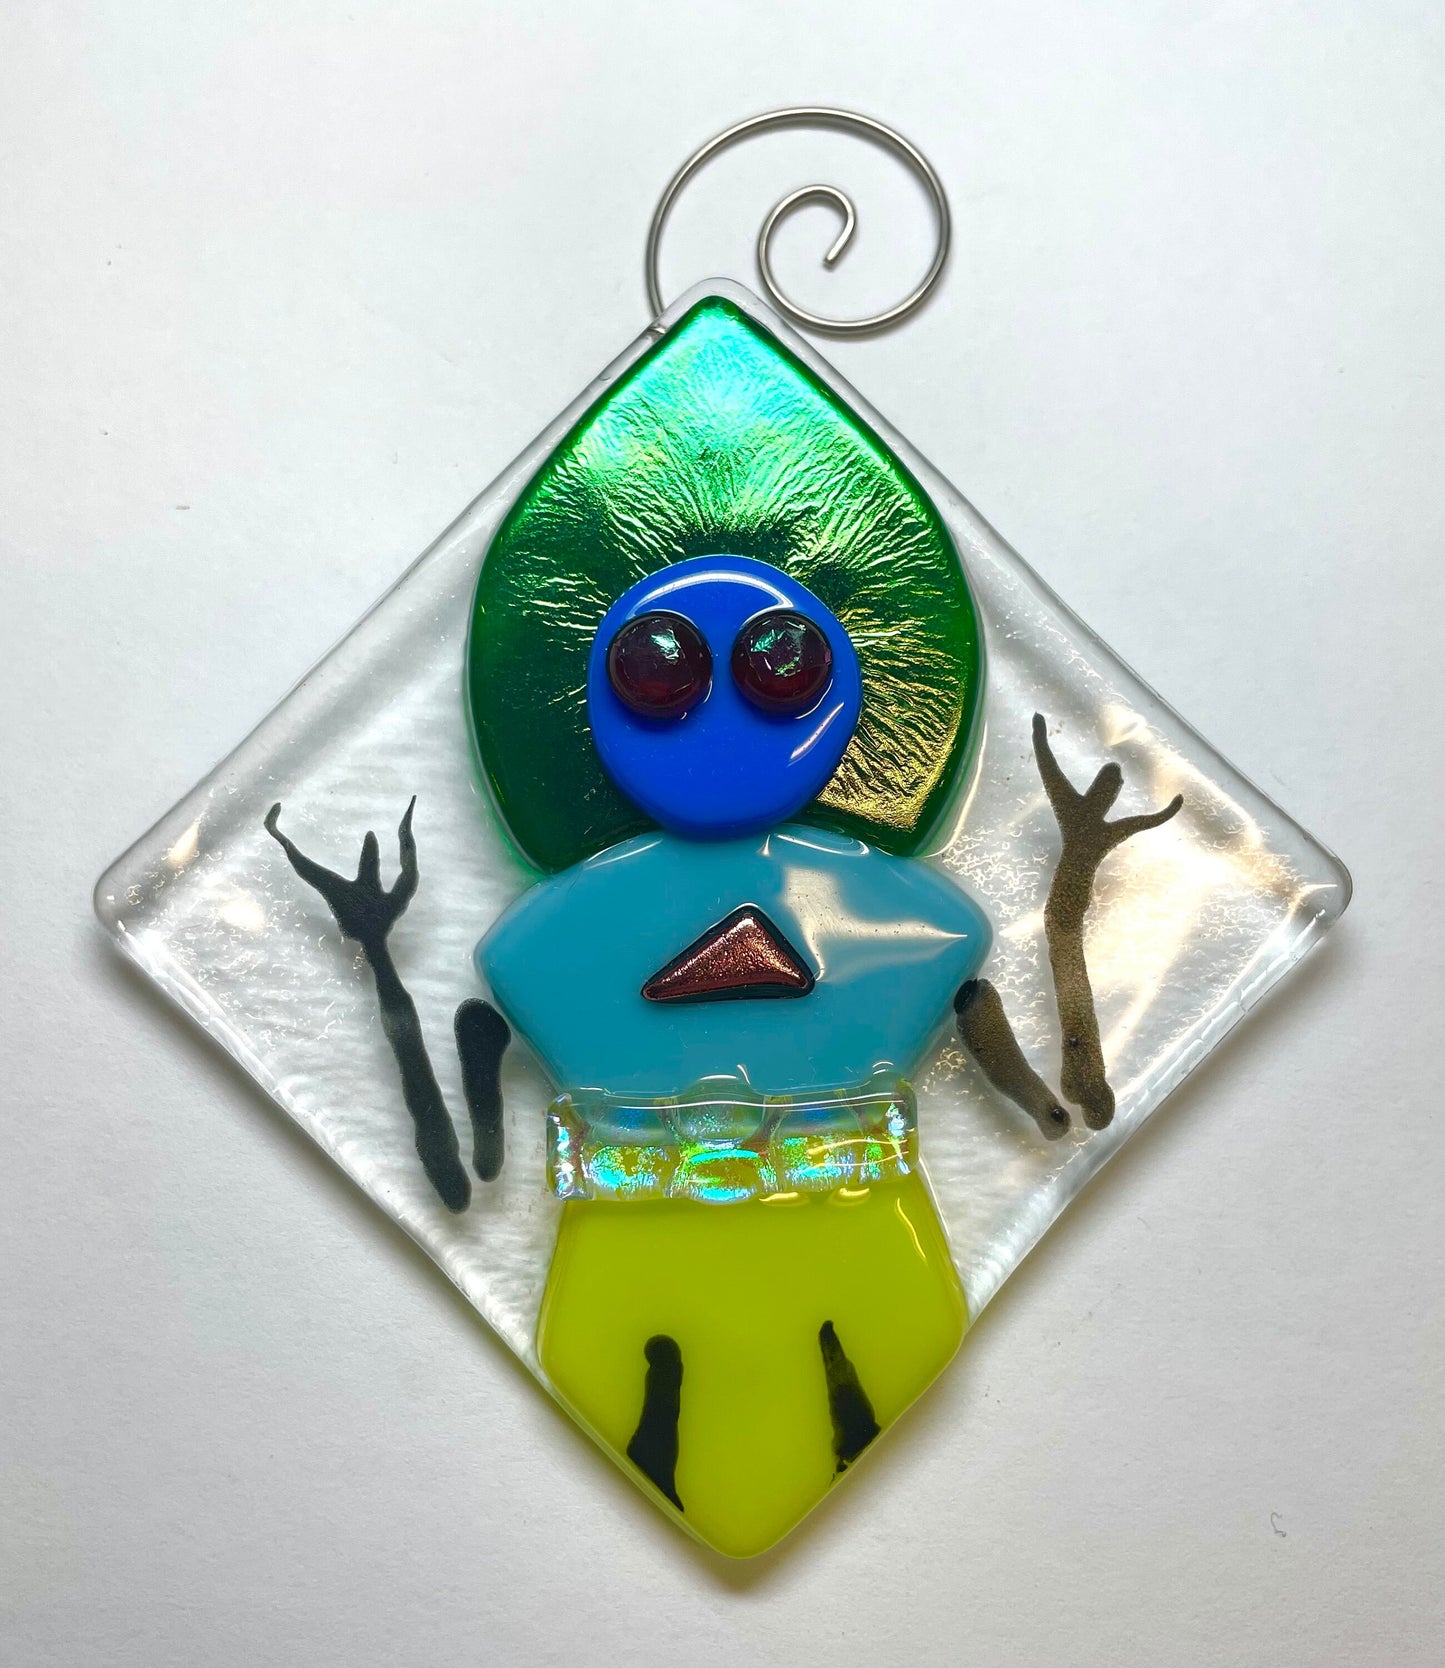 Flatwoods Monster fused glass sun catcher ornament